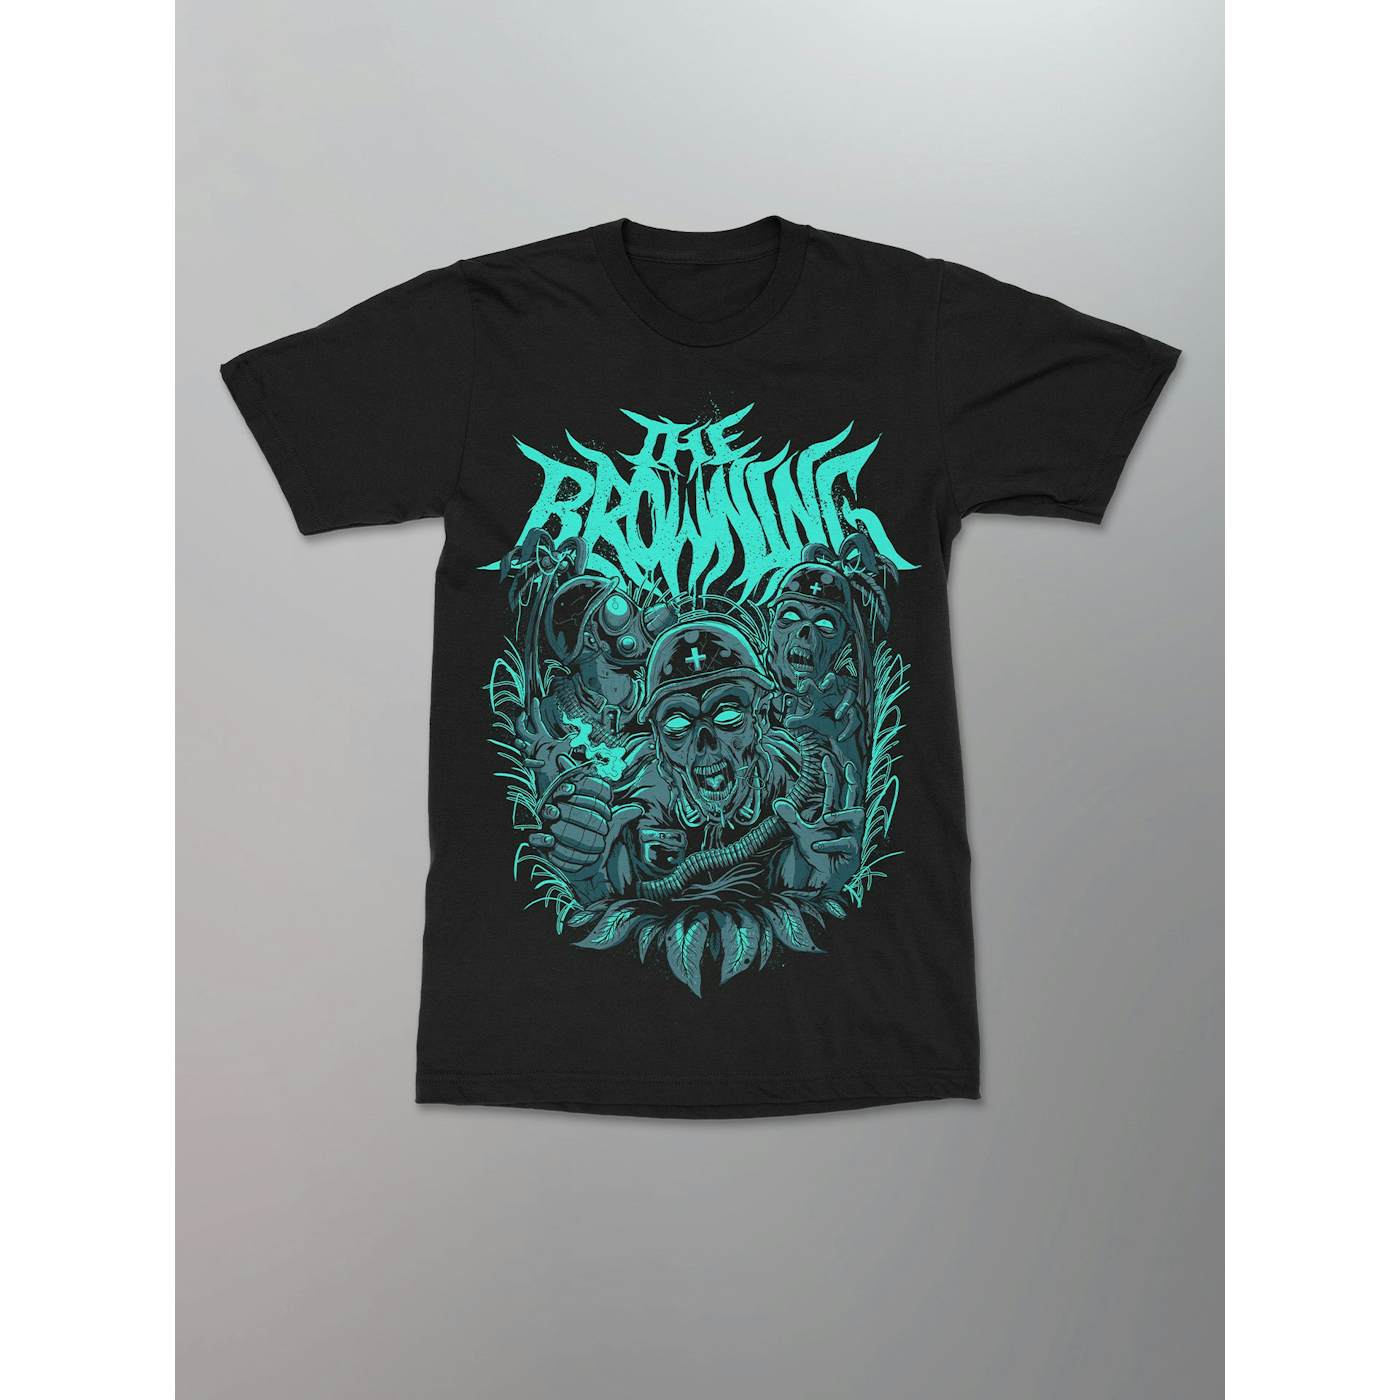 The Browning - Zombie Soldiers Shirt